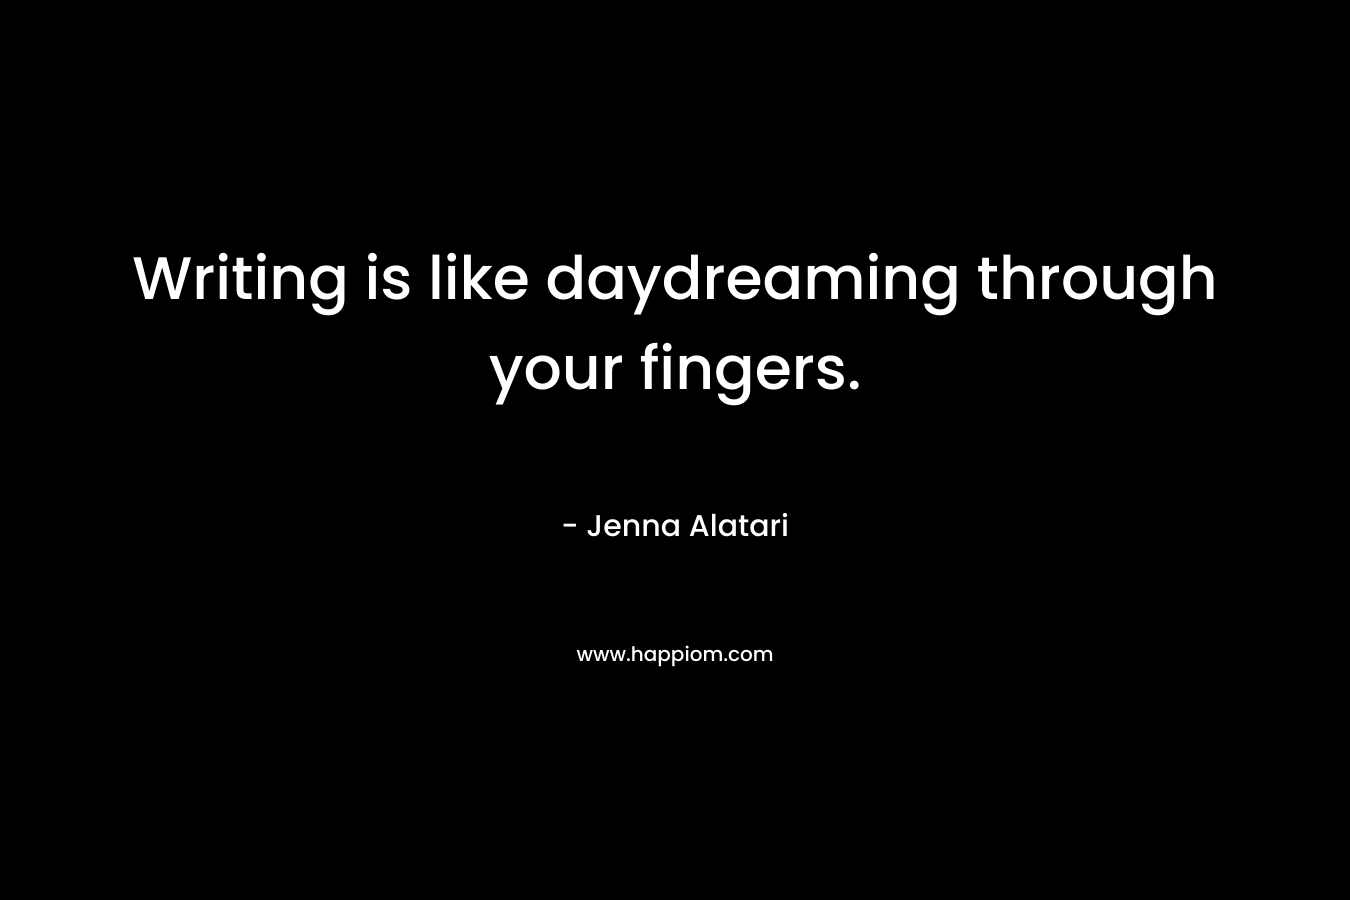 Writing is like daydreaming through your fingers.